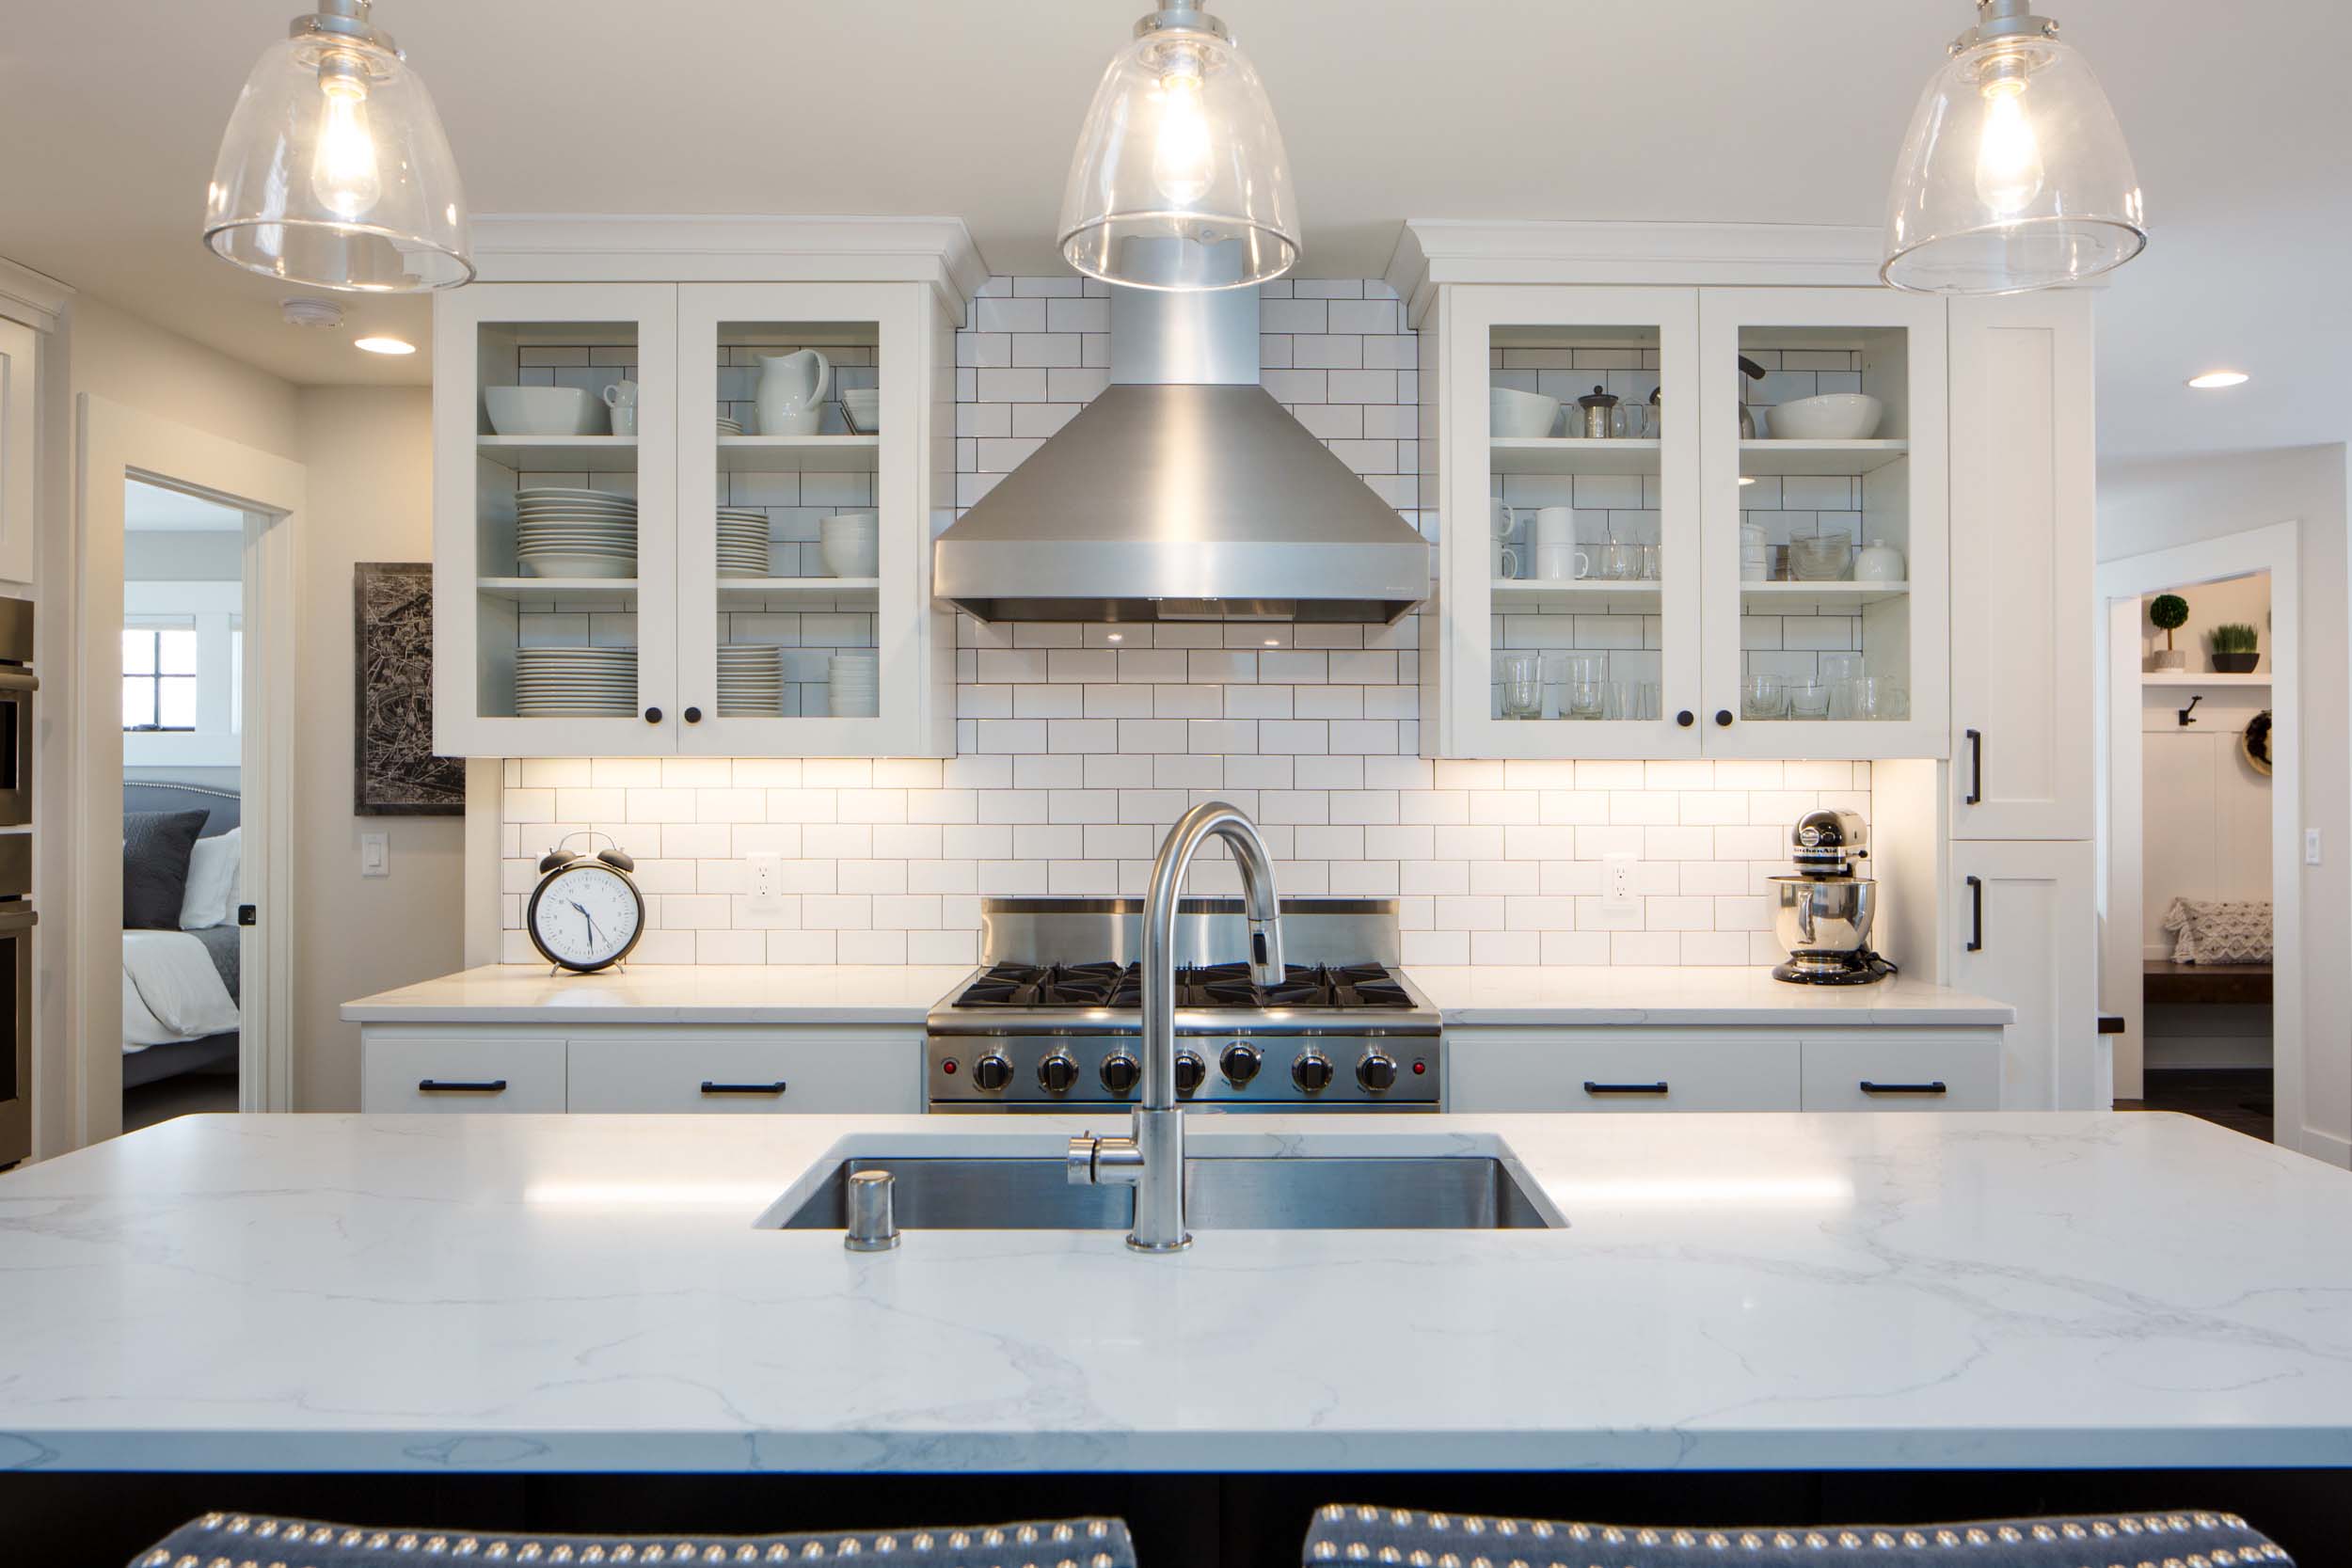 A kitchen with a white counter top and stainless steel appliances.